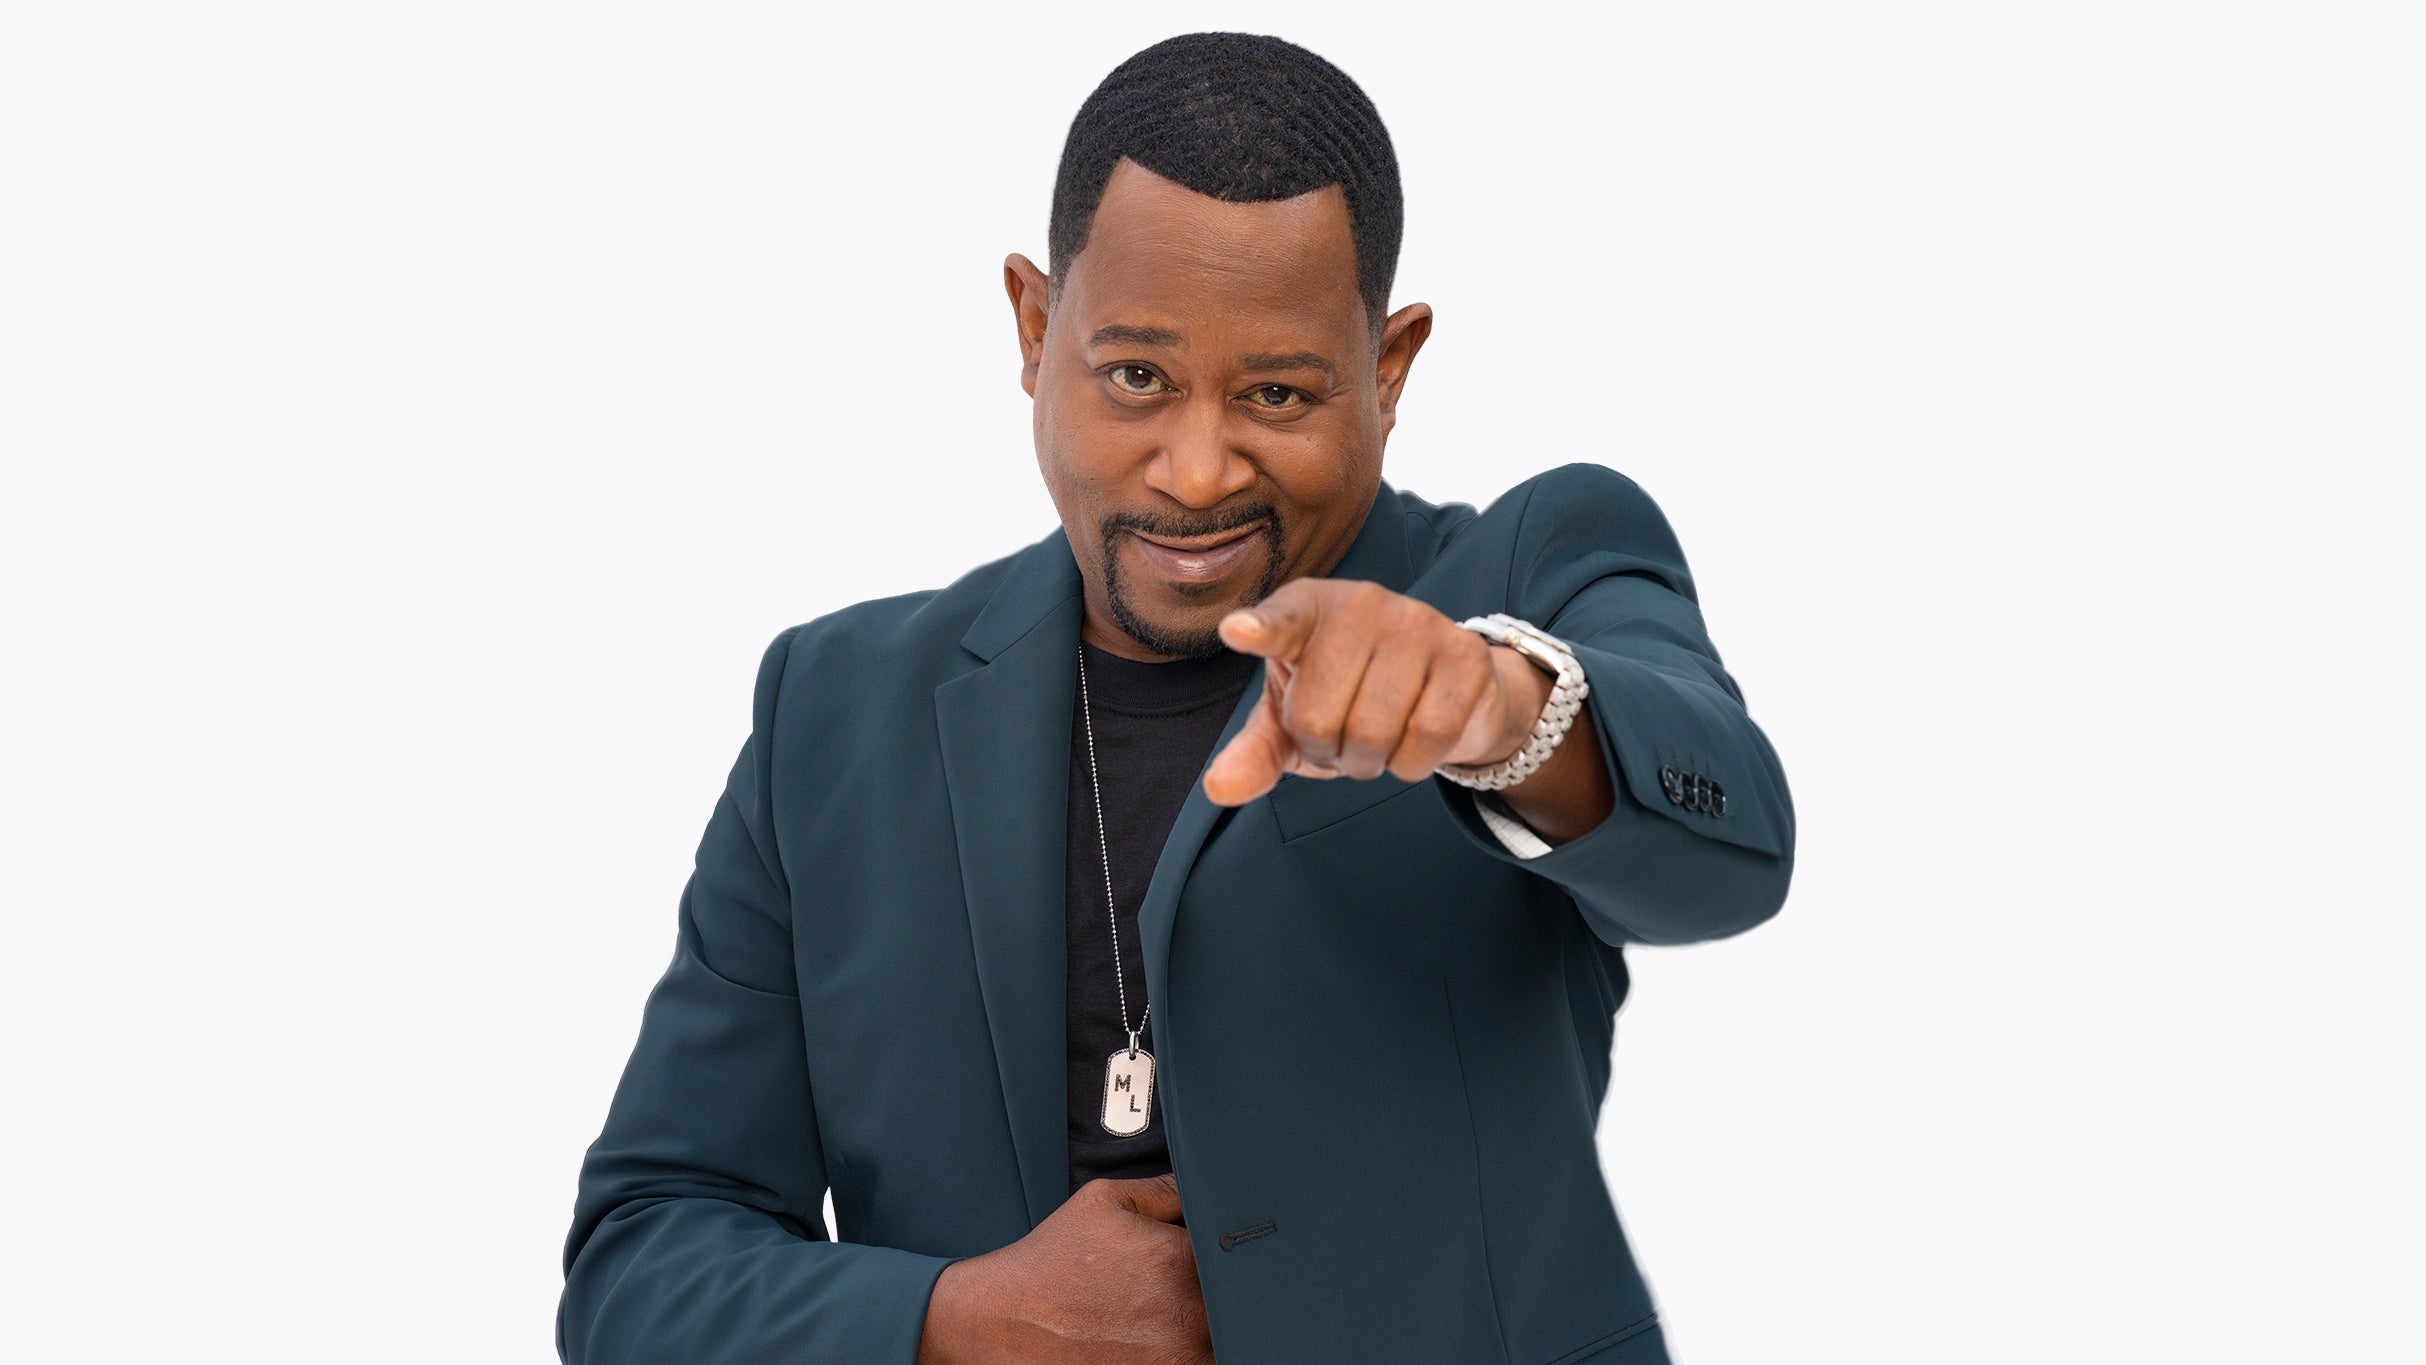 Martin Lawrence with special guests Chico Bean & Ms. Pat presale password for early tickets in Atlanta